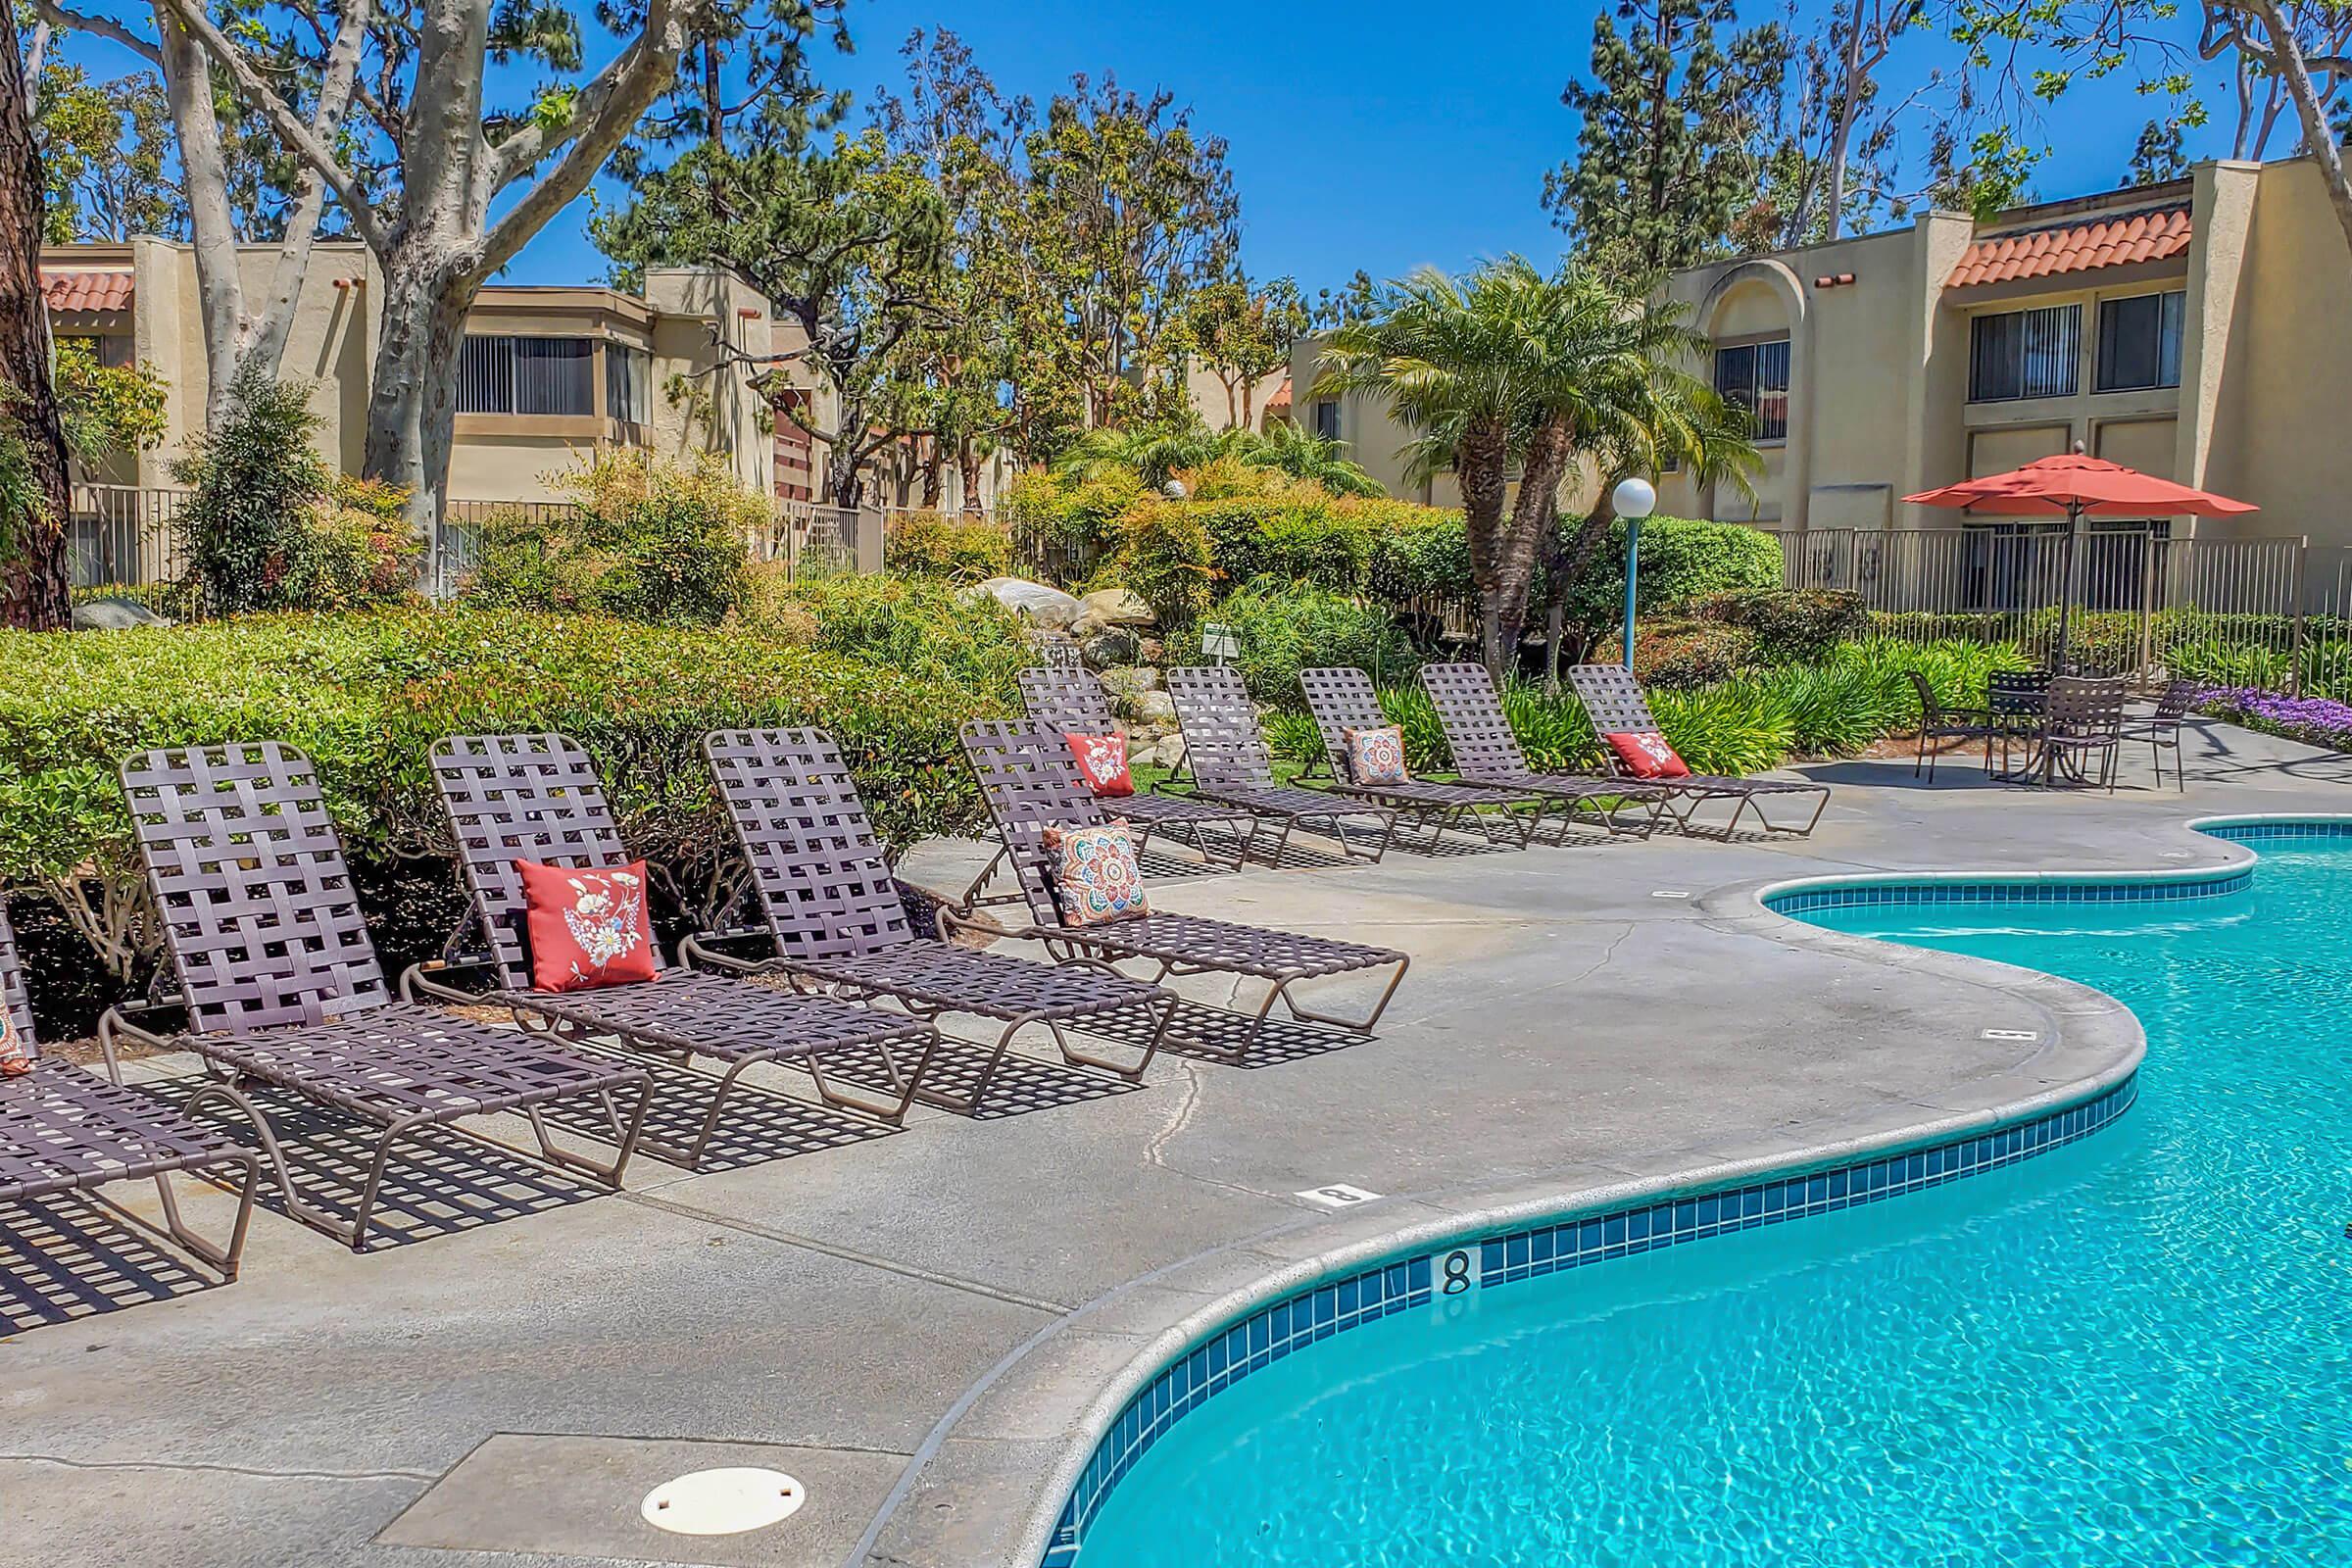 a community pool with lounge chairs